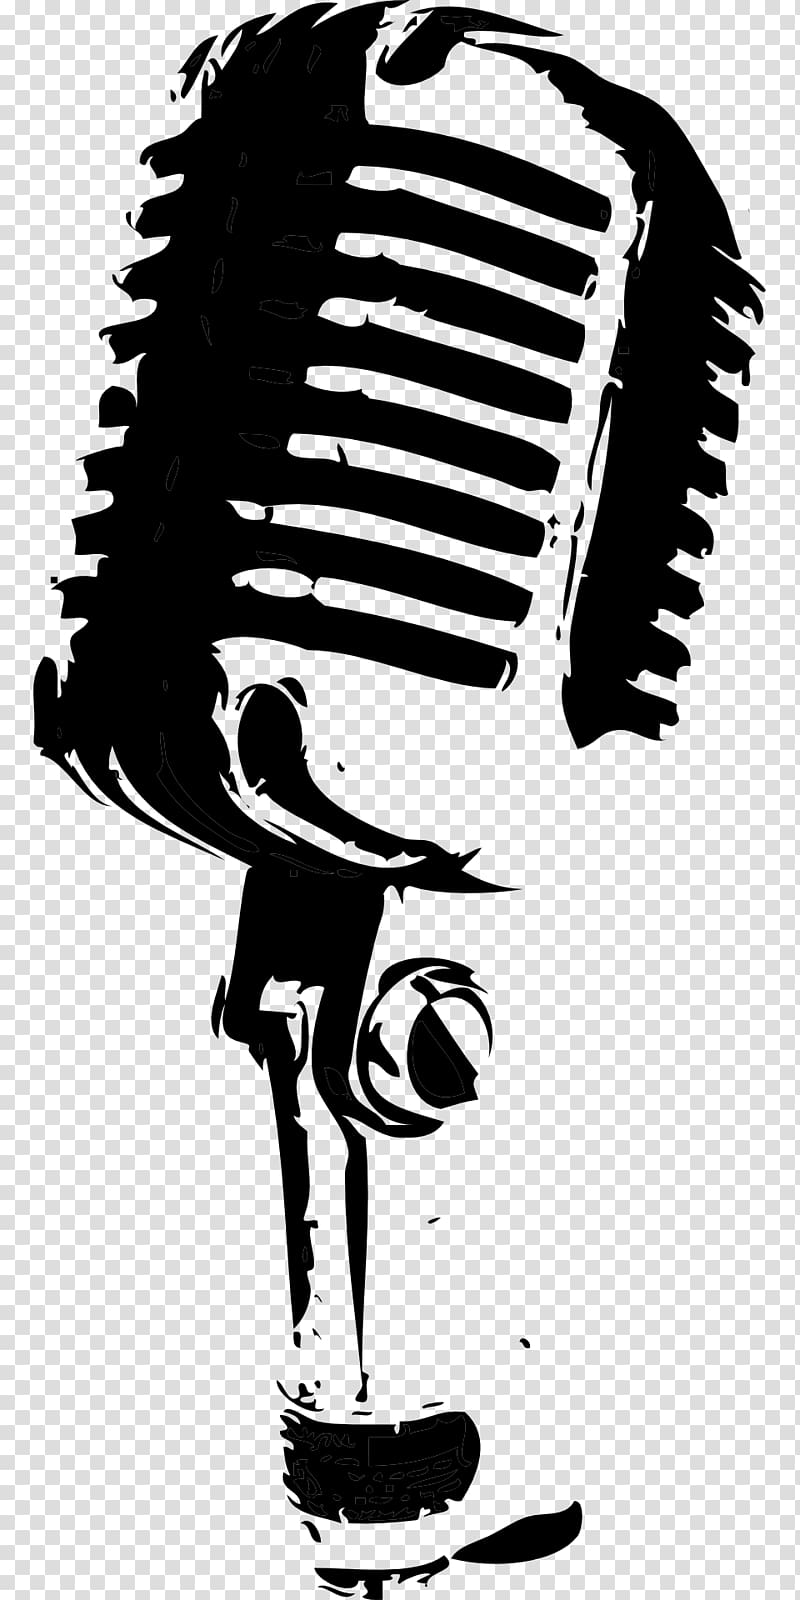 Microphone Black and white , microphone transparent background PNG clipart